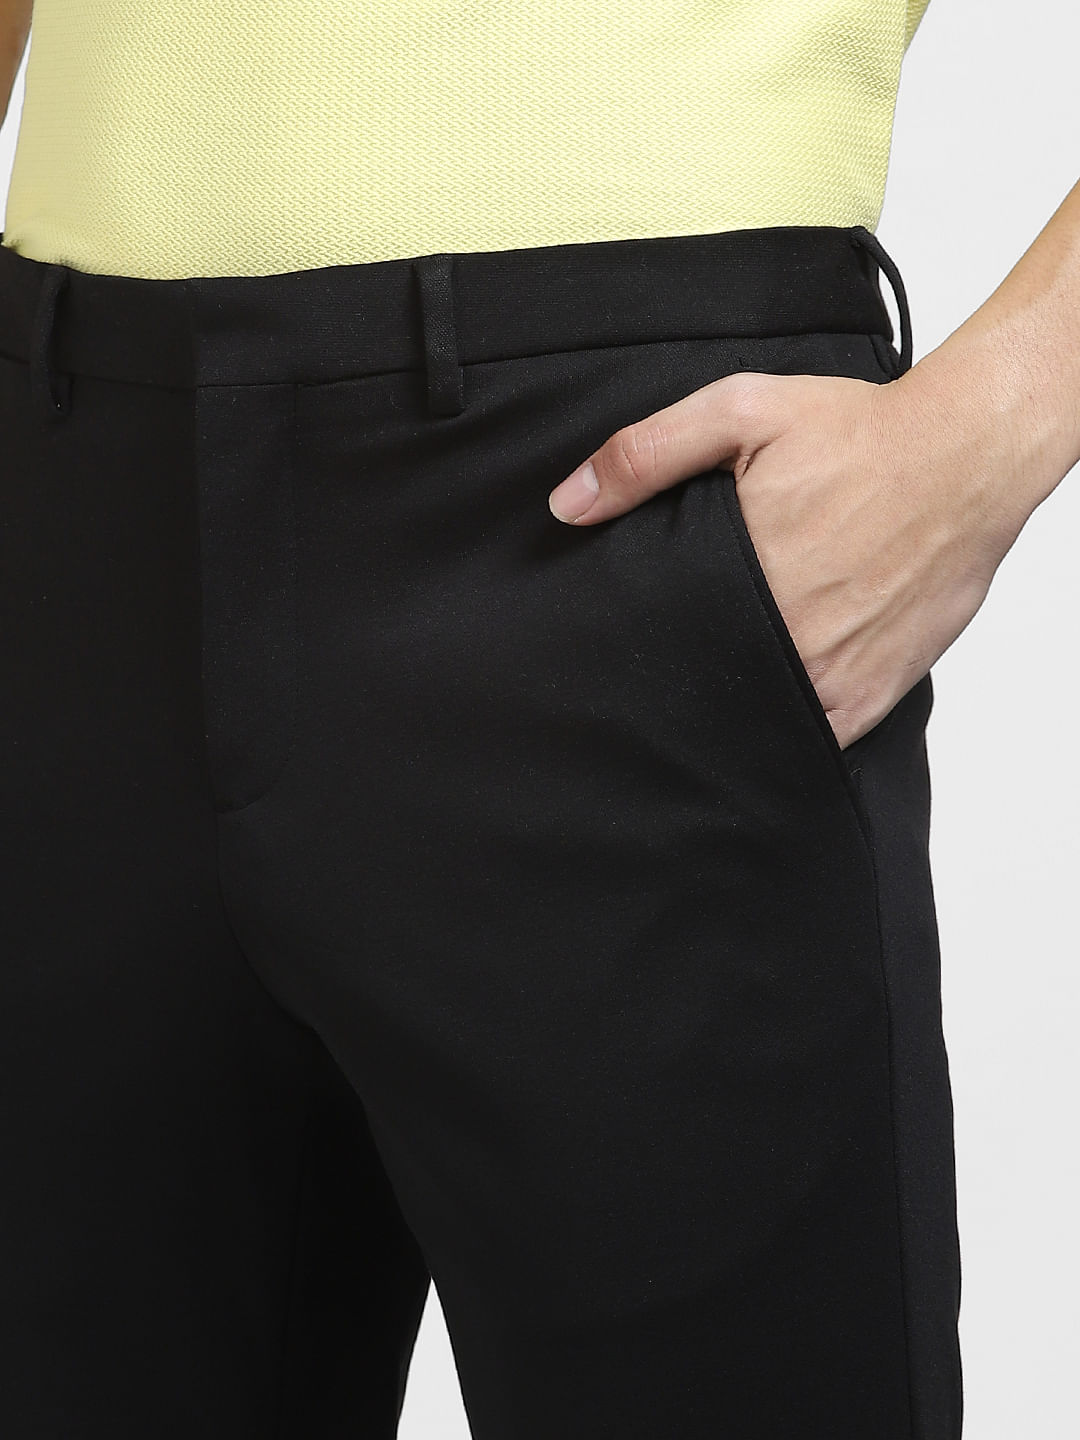 Byford Men Solid Black Trousers - Selling Fast at Pantaloons.com